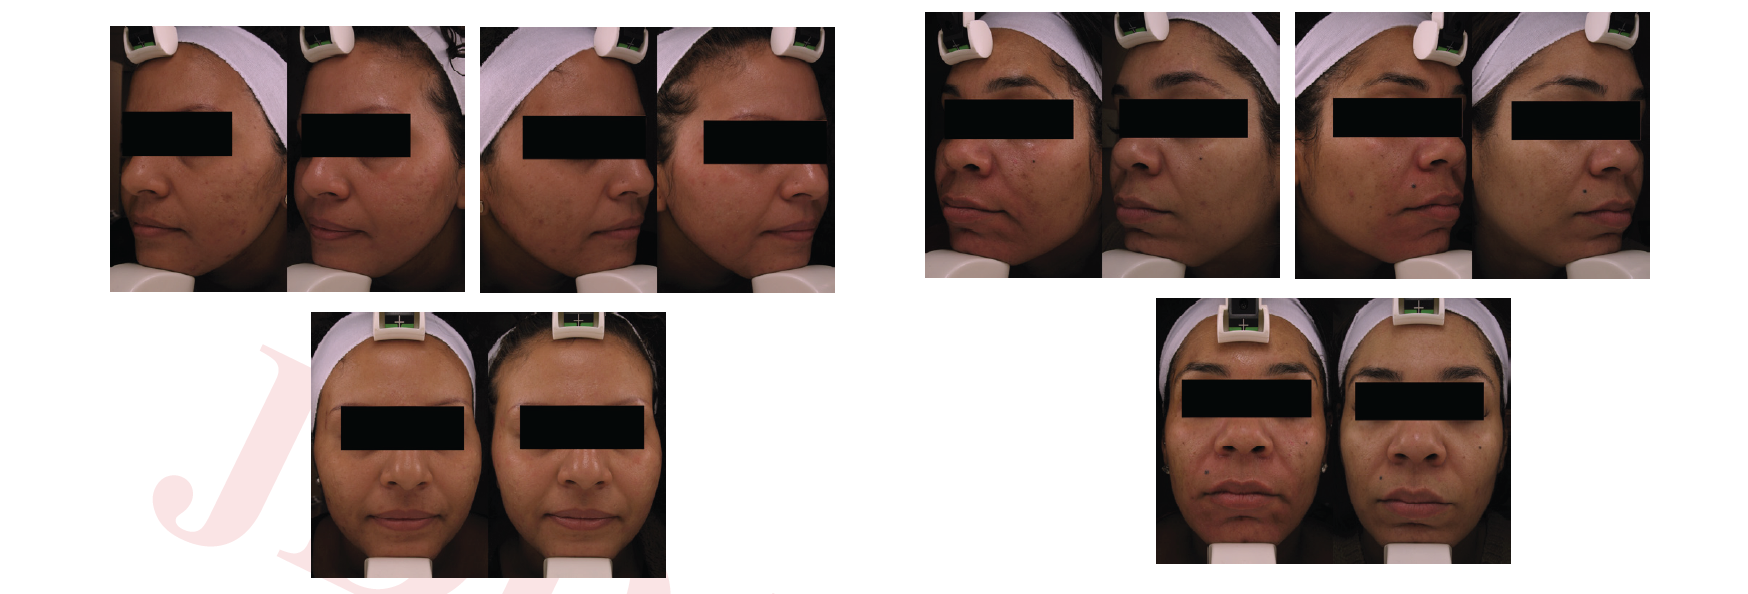 The Fate of Active Acne and Acne Scars Following Treatment With Fractional Radiofrequency